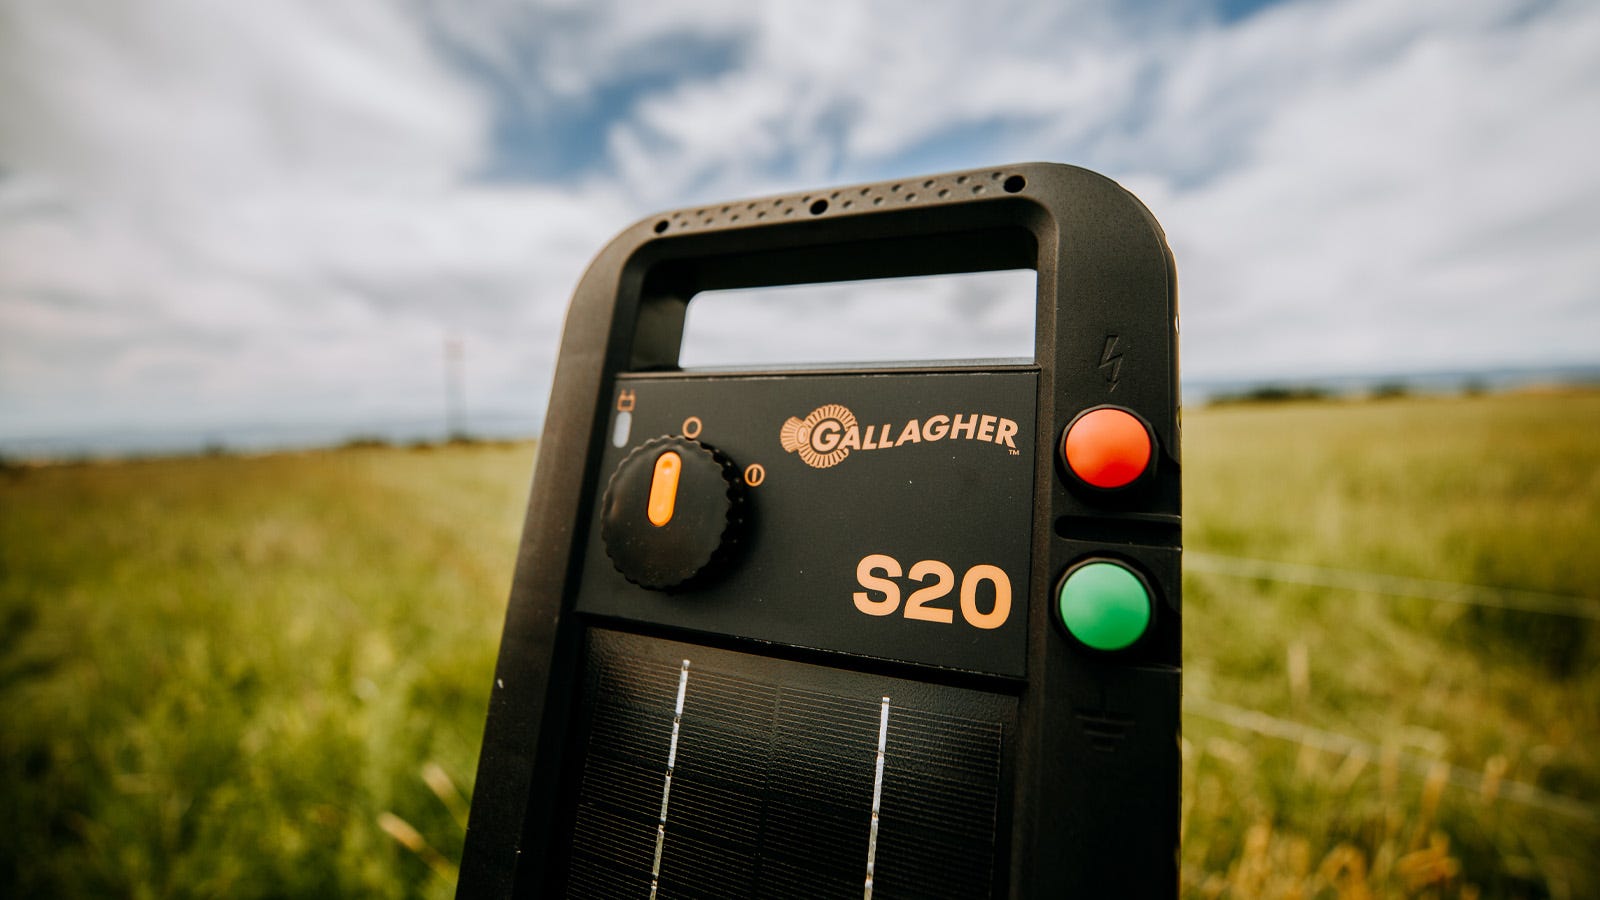 A Gallagher s20 energizer on a post in a field